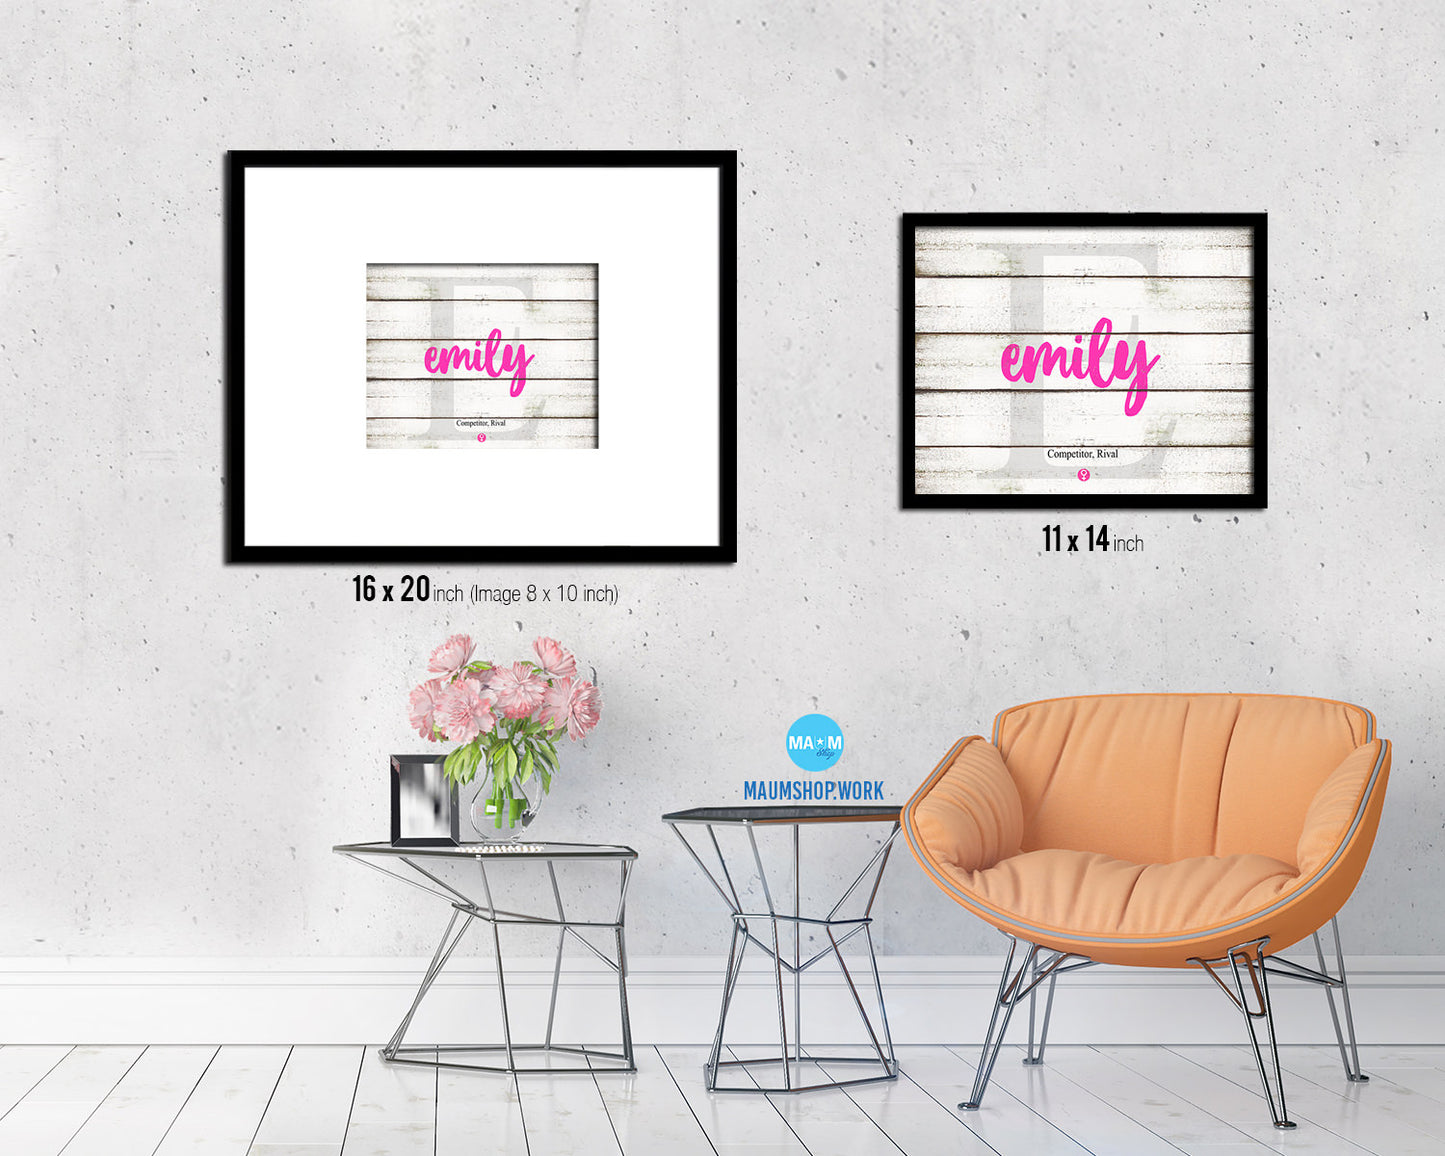 Emily Personalized Biblical Name Plate Art Framed Print Kids Baby Room Wall Decor Gifts